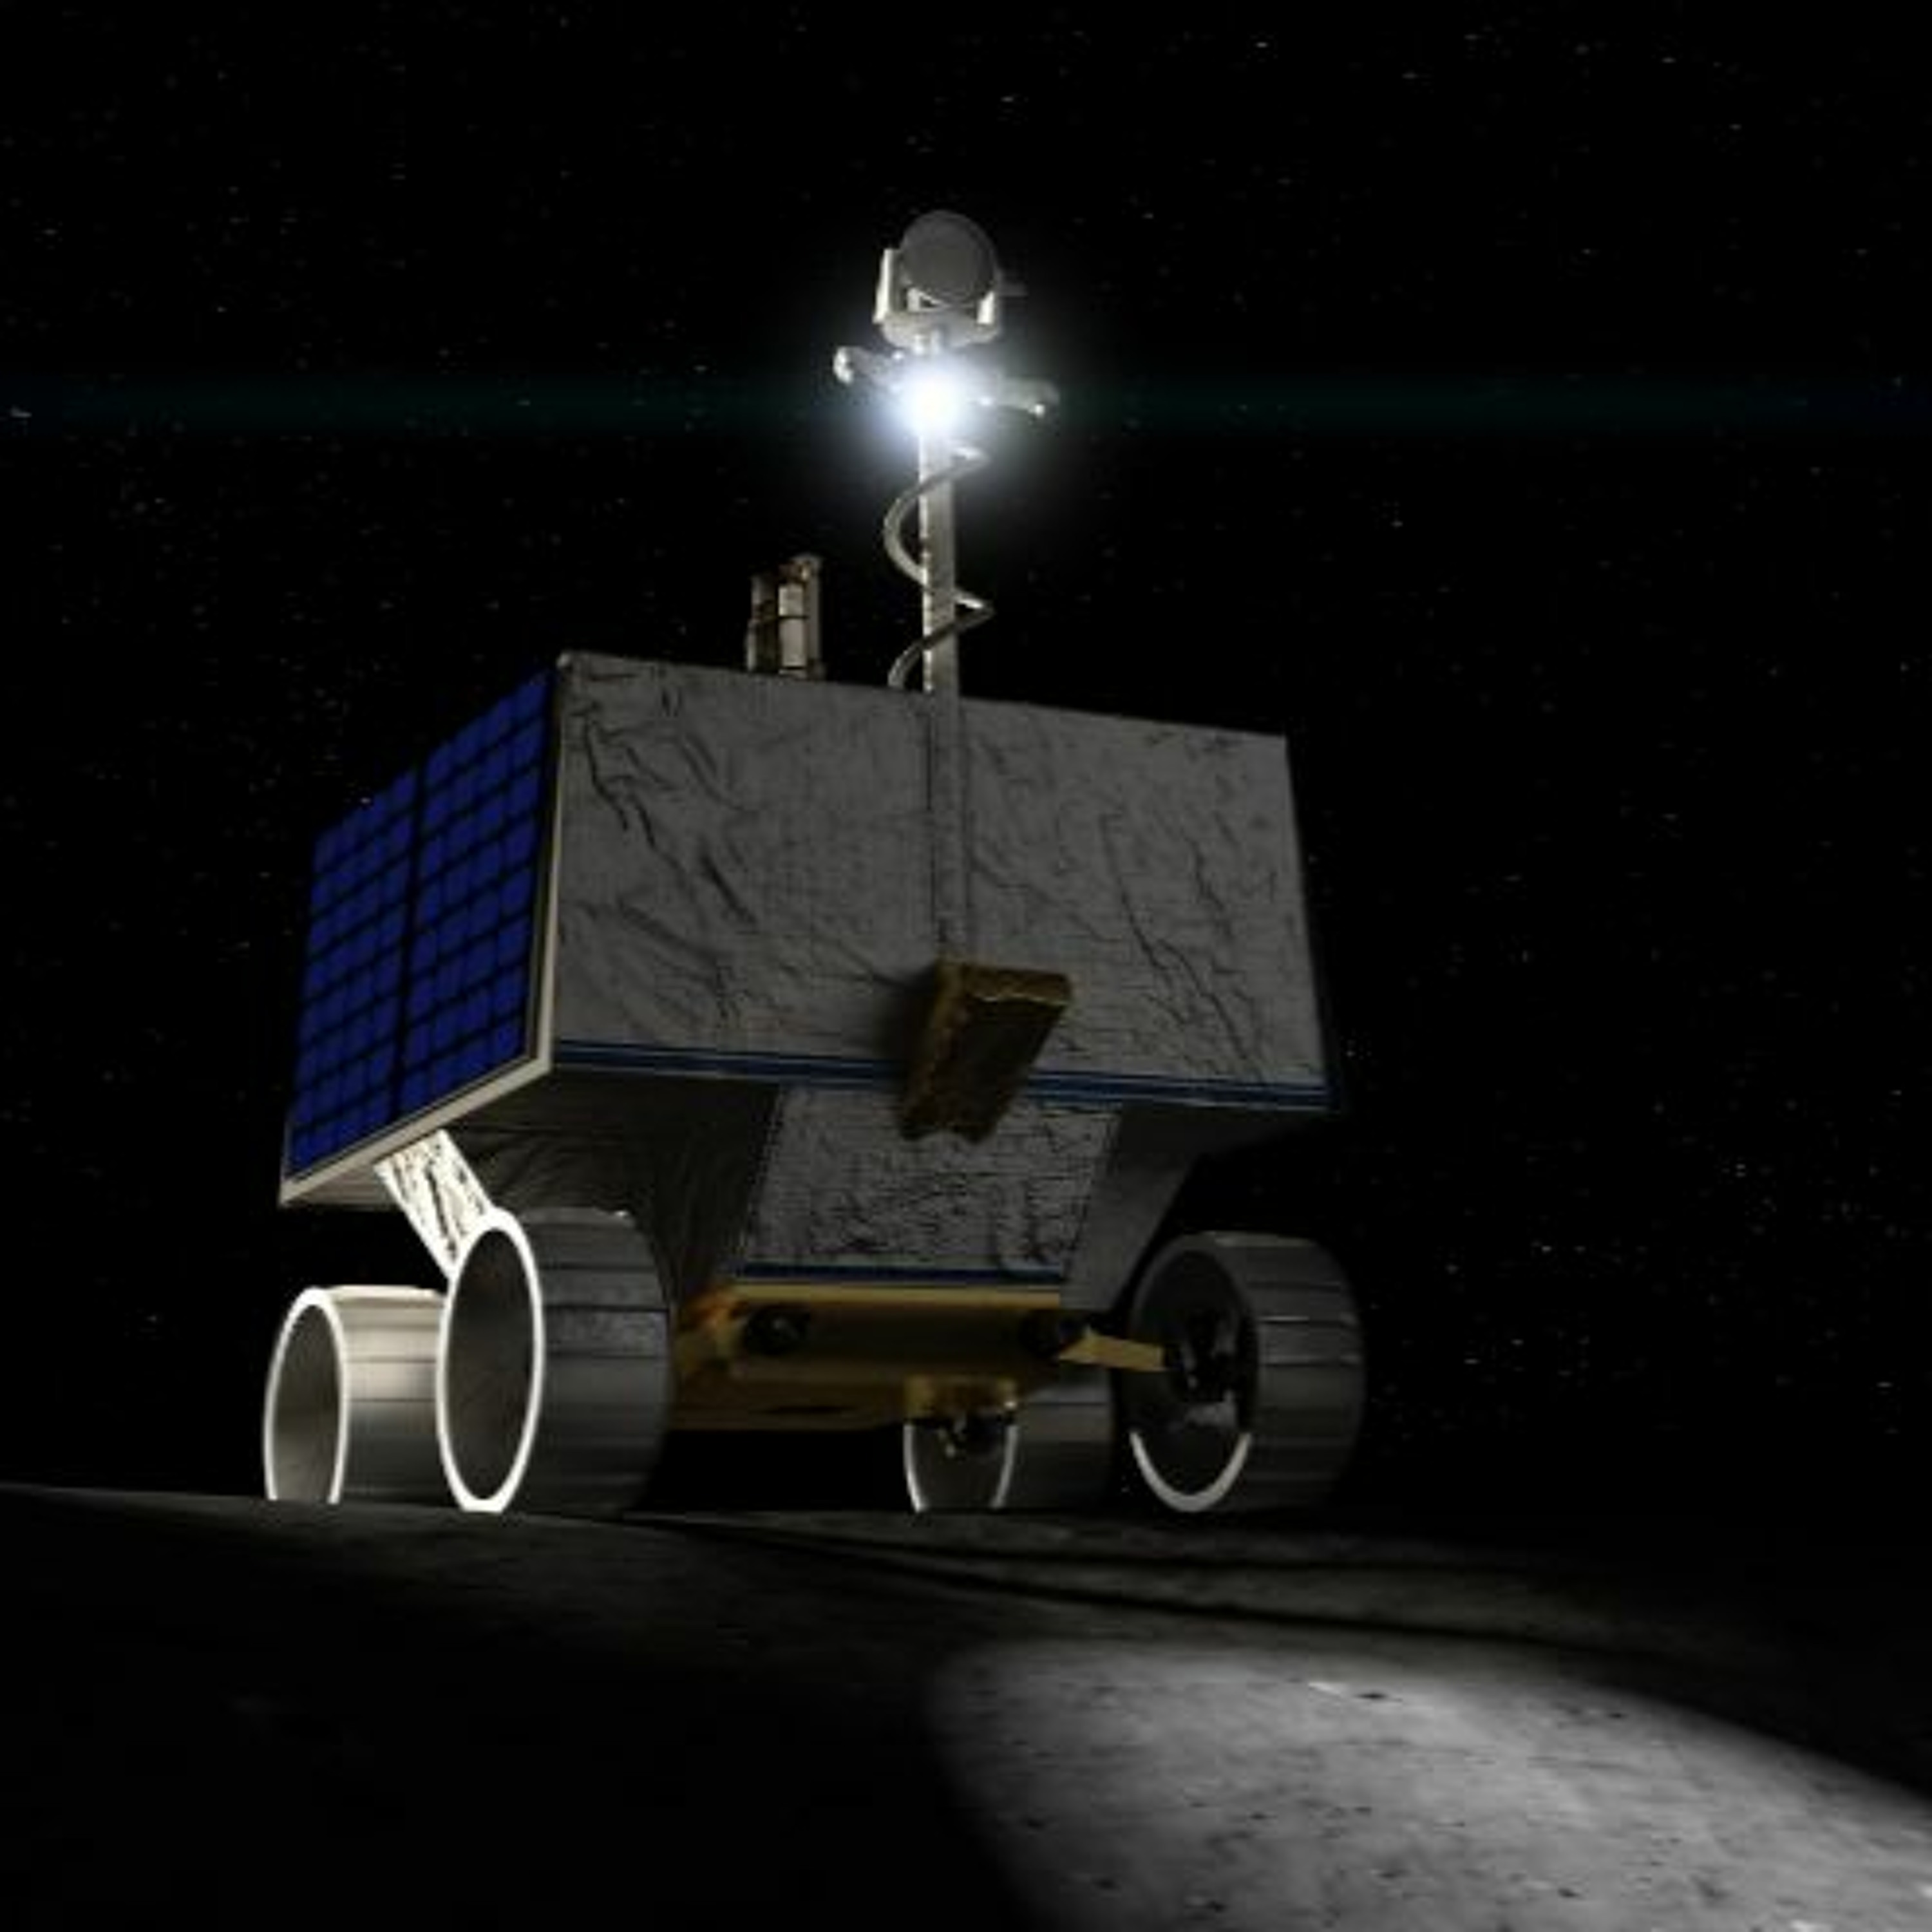 The Lunar VIPER rover and the space economy